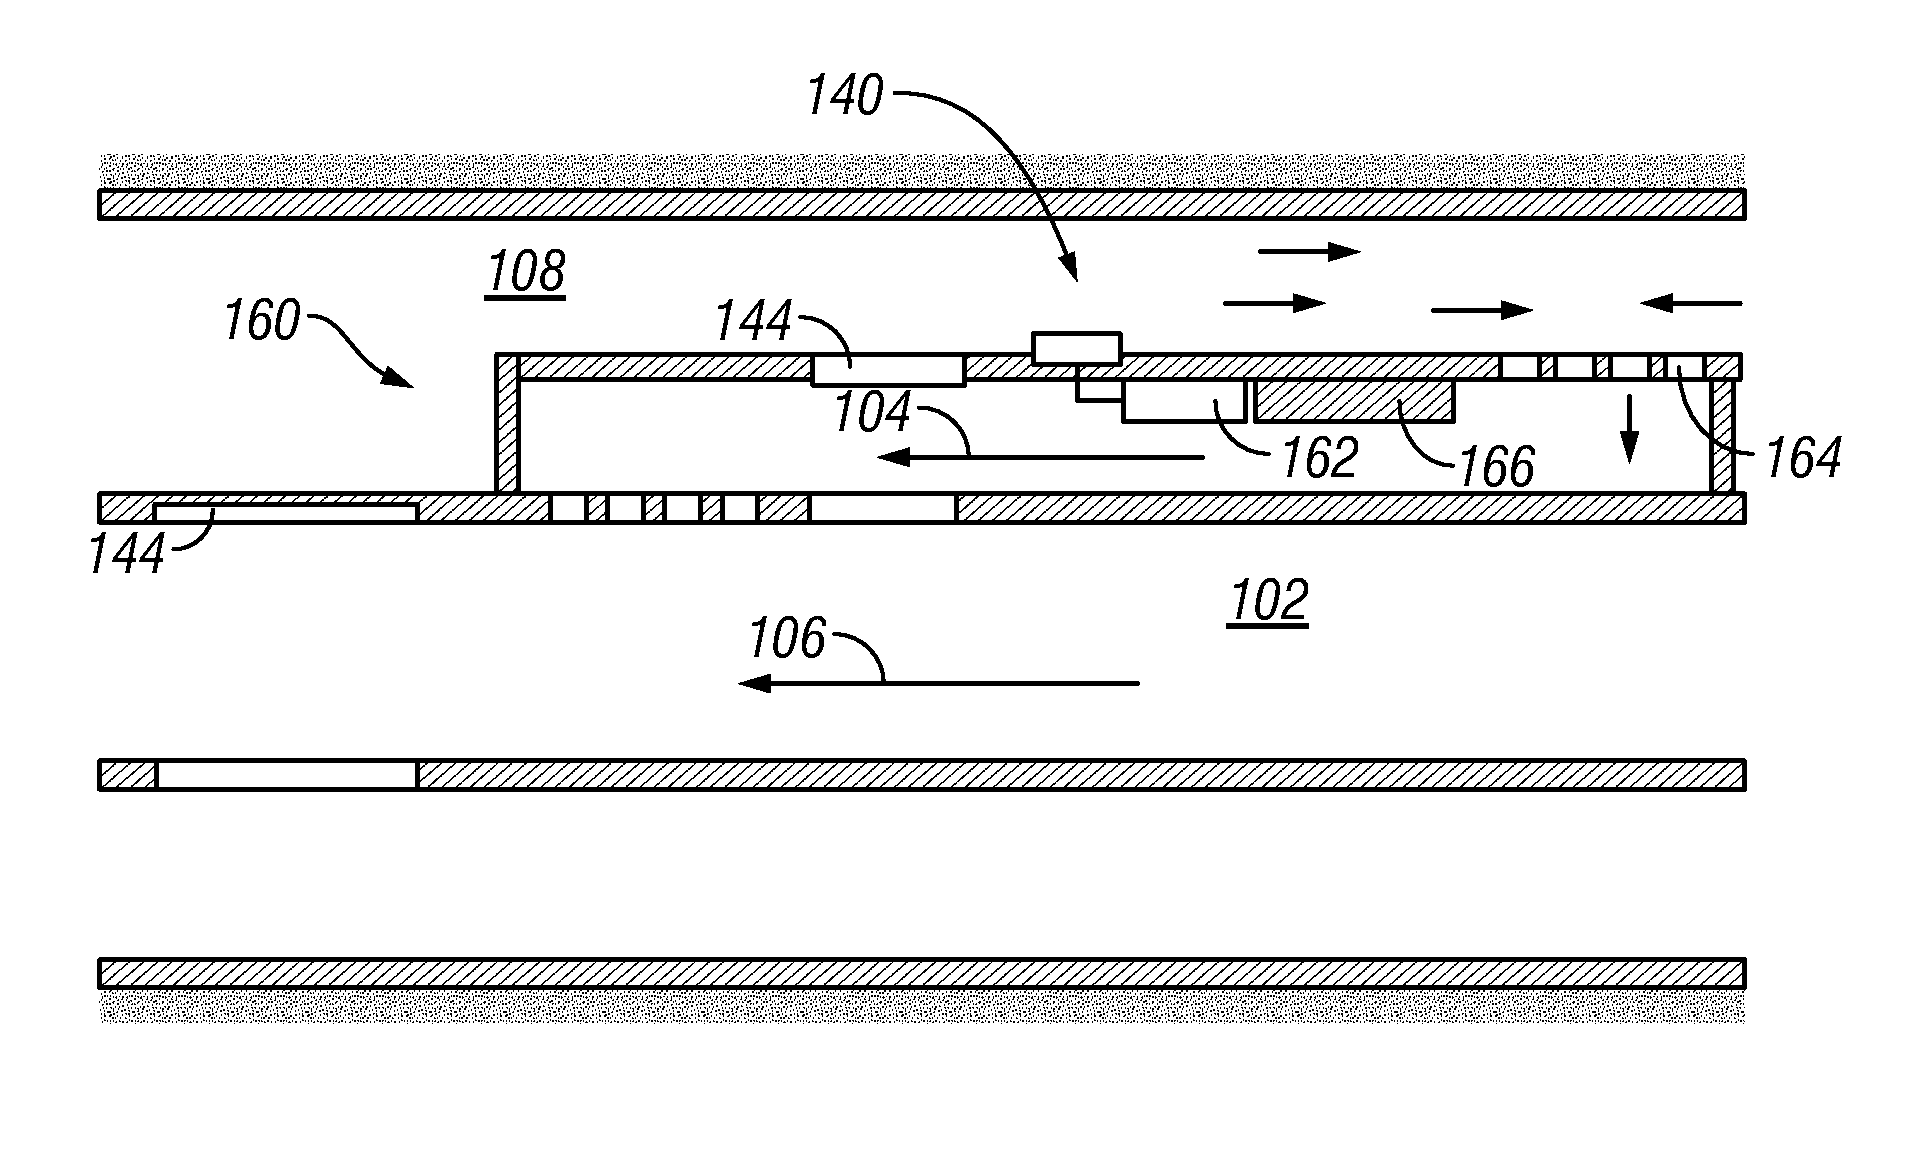 Water control device using electromagnetics